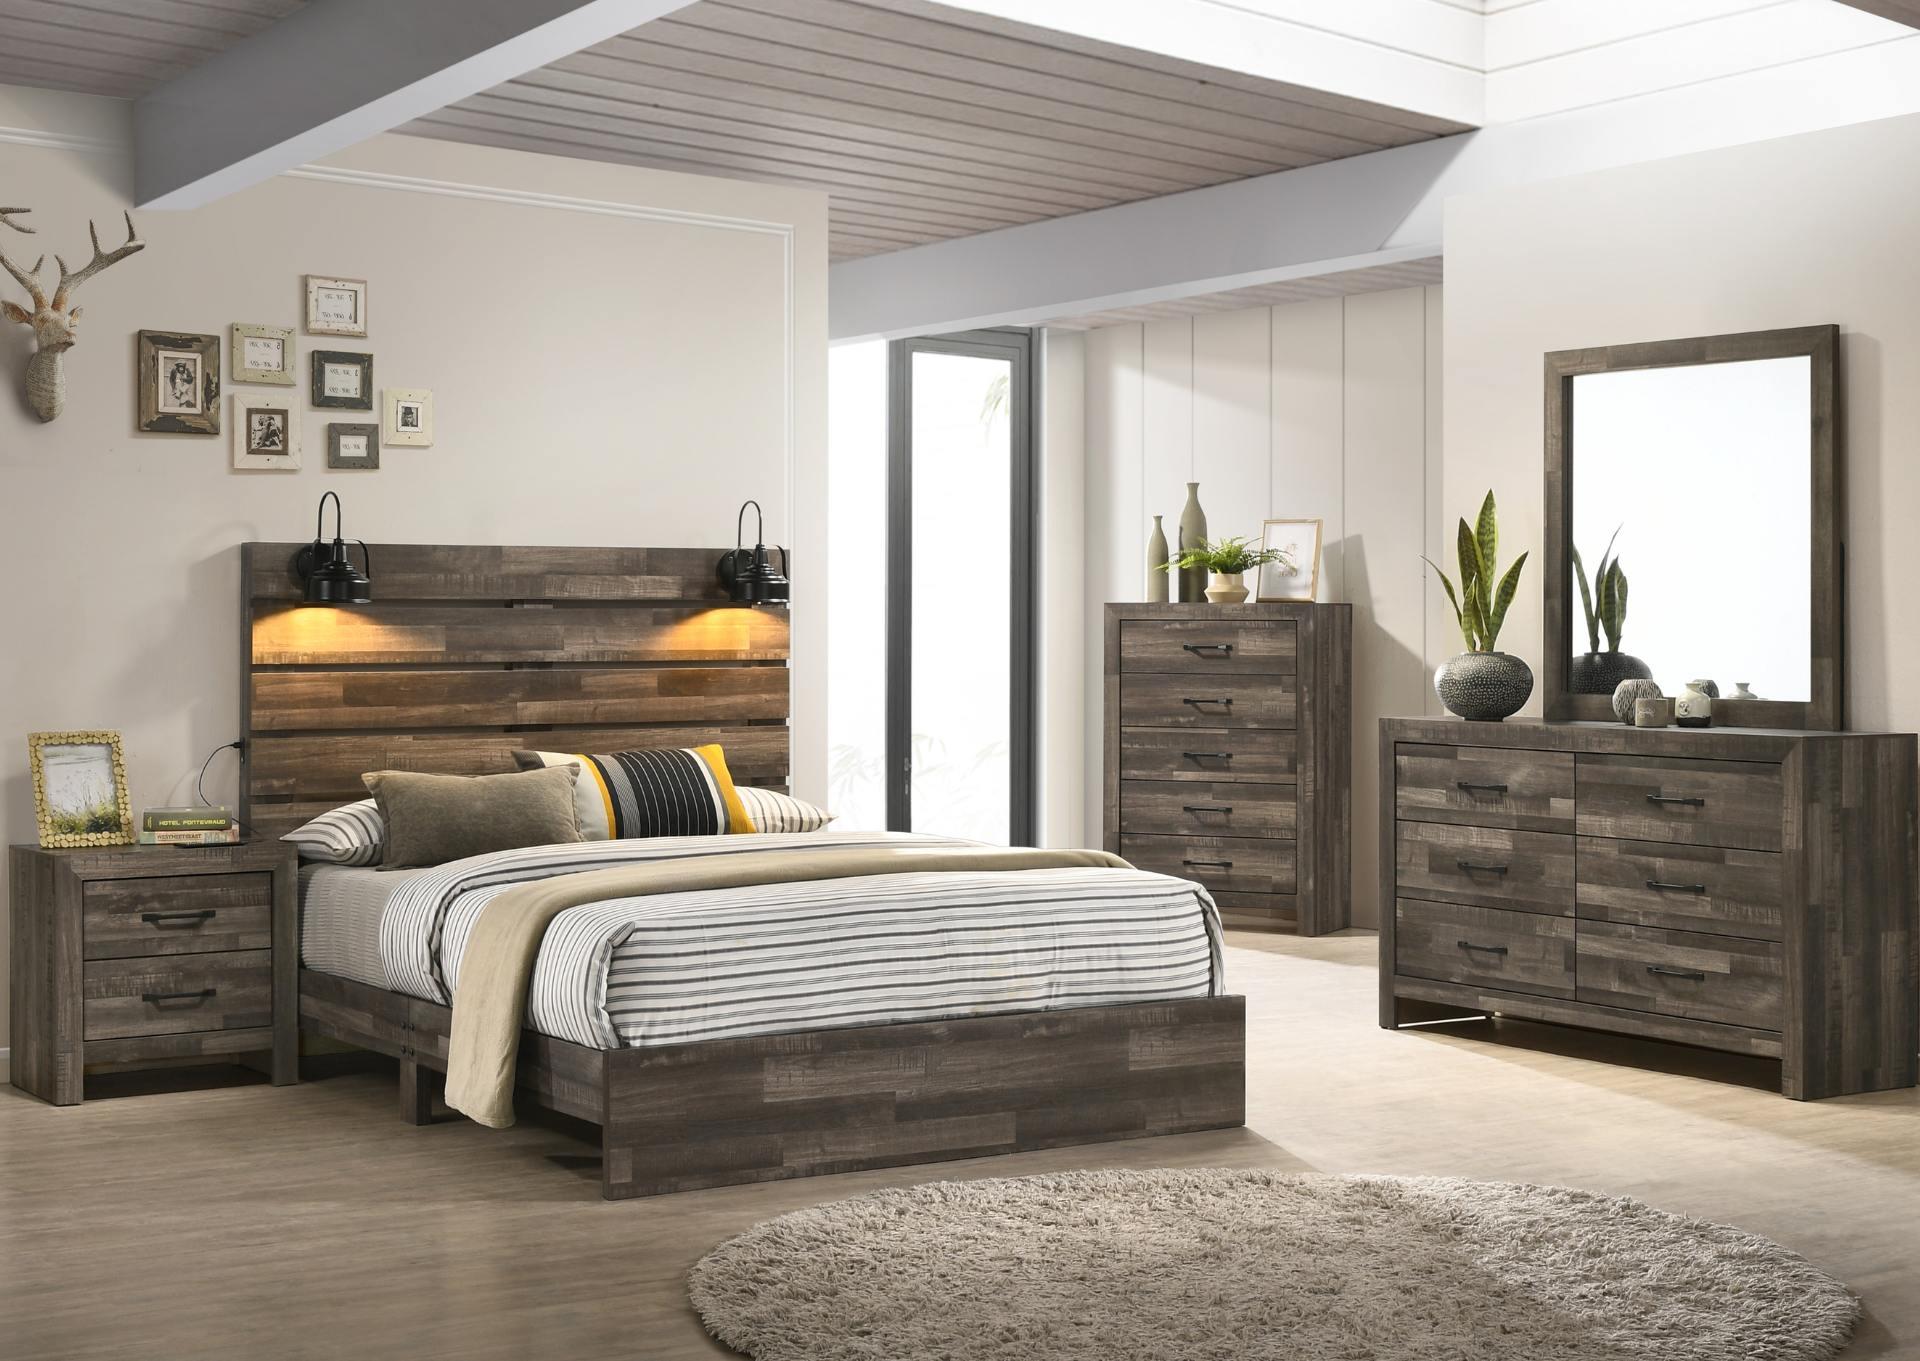 ARIANNA BROWN KING BEDROOM WITH LIGHTS,LIFESTYLE FURNITURE